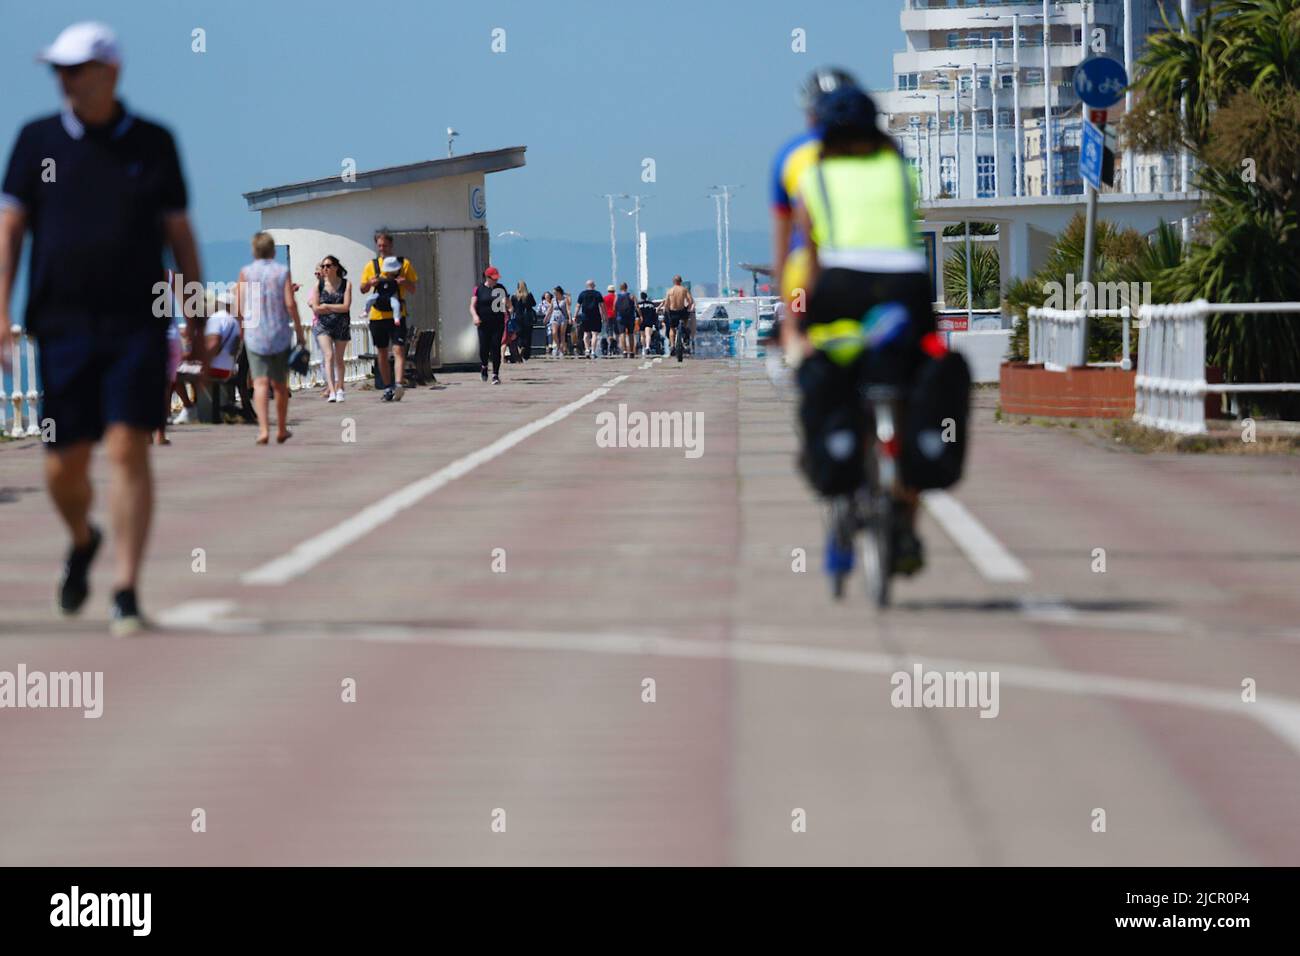 Hastings, East Sussex, UK. 15 Jun, 2022. UK Weather: Hot and sunny at the seaside town of Hastings in East Sussex as Brits enjoy the warm weather today along the seafront promenade. Photo Credit: Paul Lawrenson /Alamy Live News Stock Photo